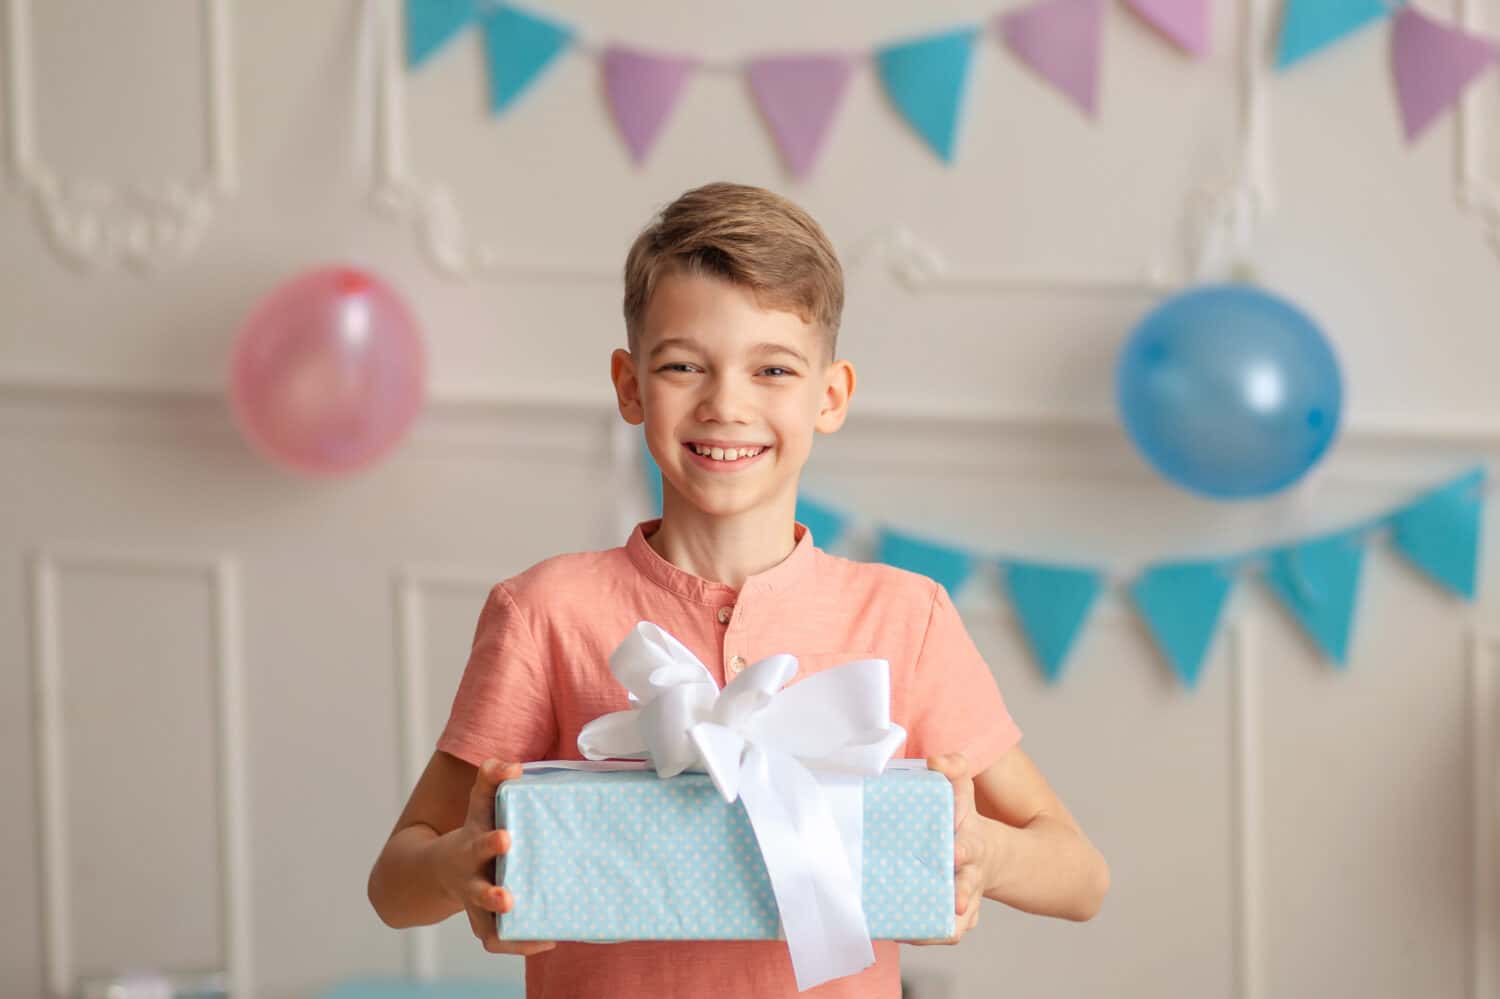 Happy Birthday Portrait of a happy cute boy of 8-9 years old in a festive decor with confetti and gifts.